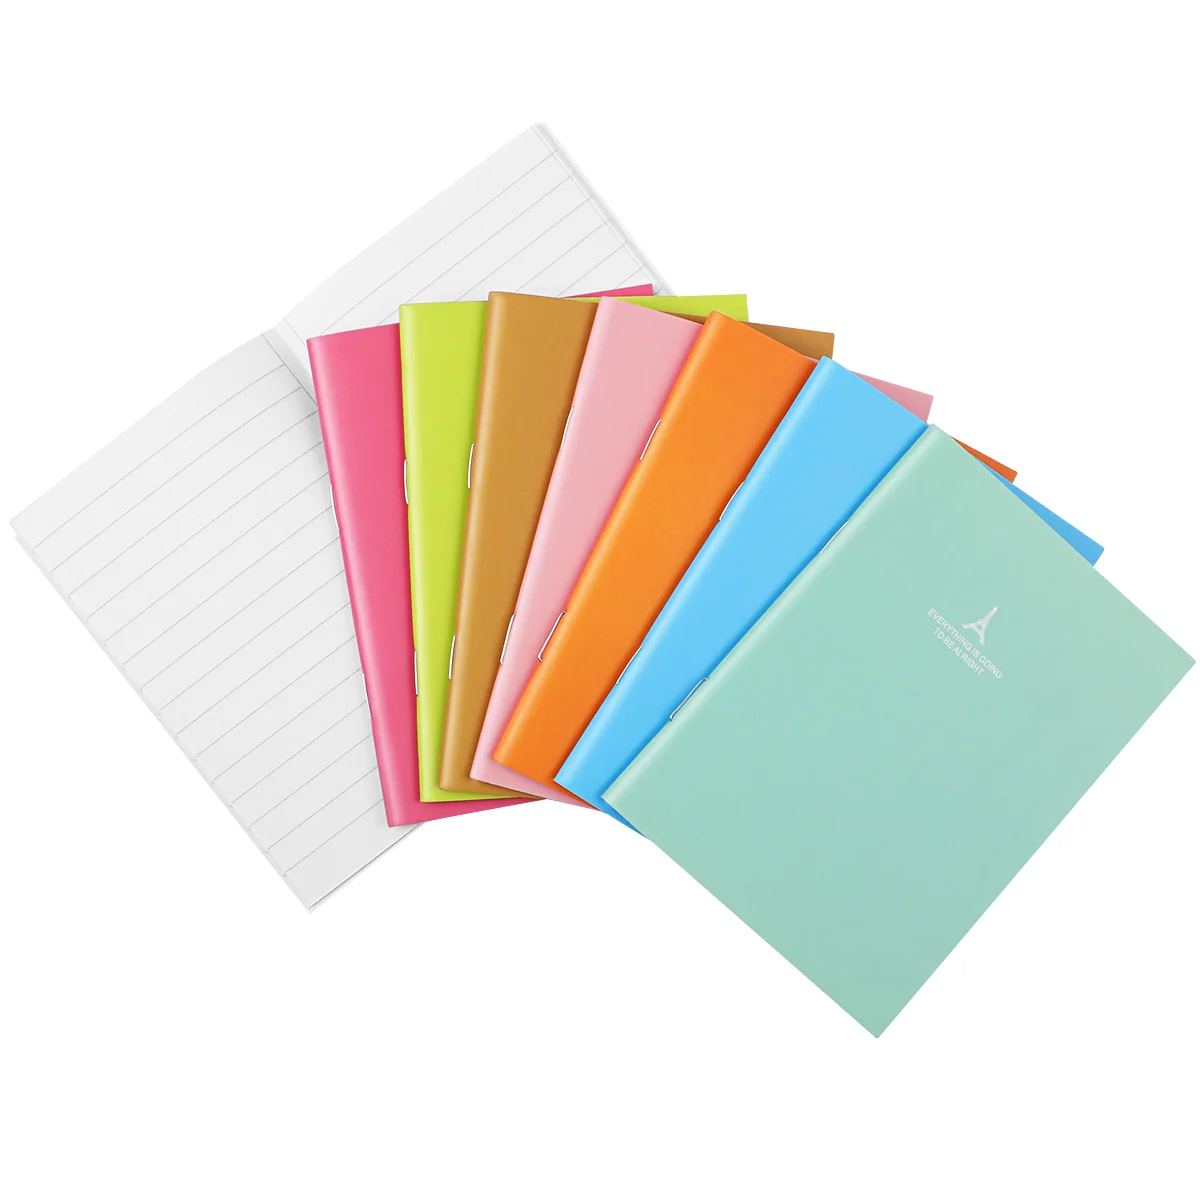 

Notebook Mini Notebooks Steno Notepad Composition Pocket Book Pads Bulk Journal Memo Note Kids Notes Journals Wide Ruled Gifts